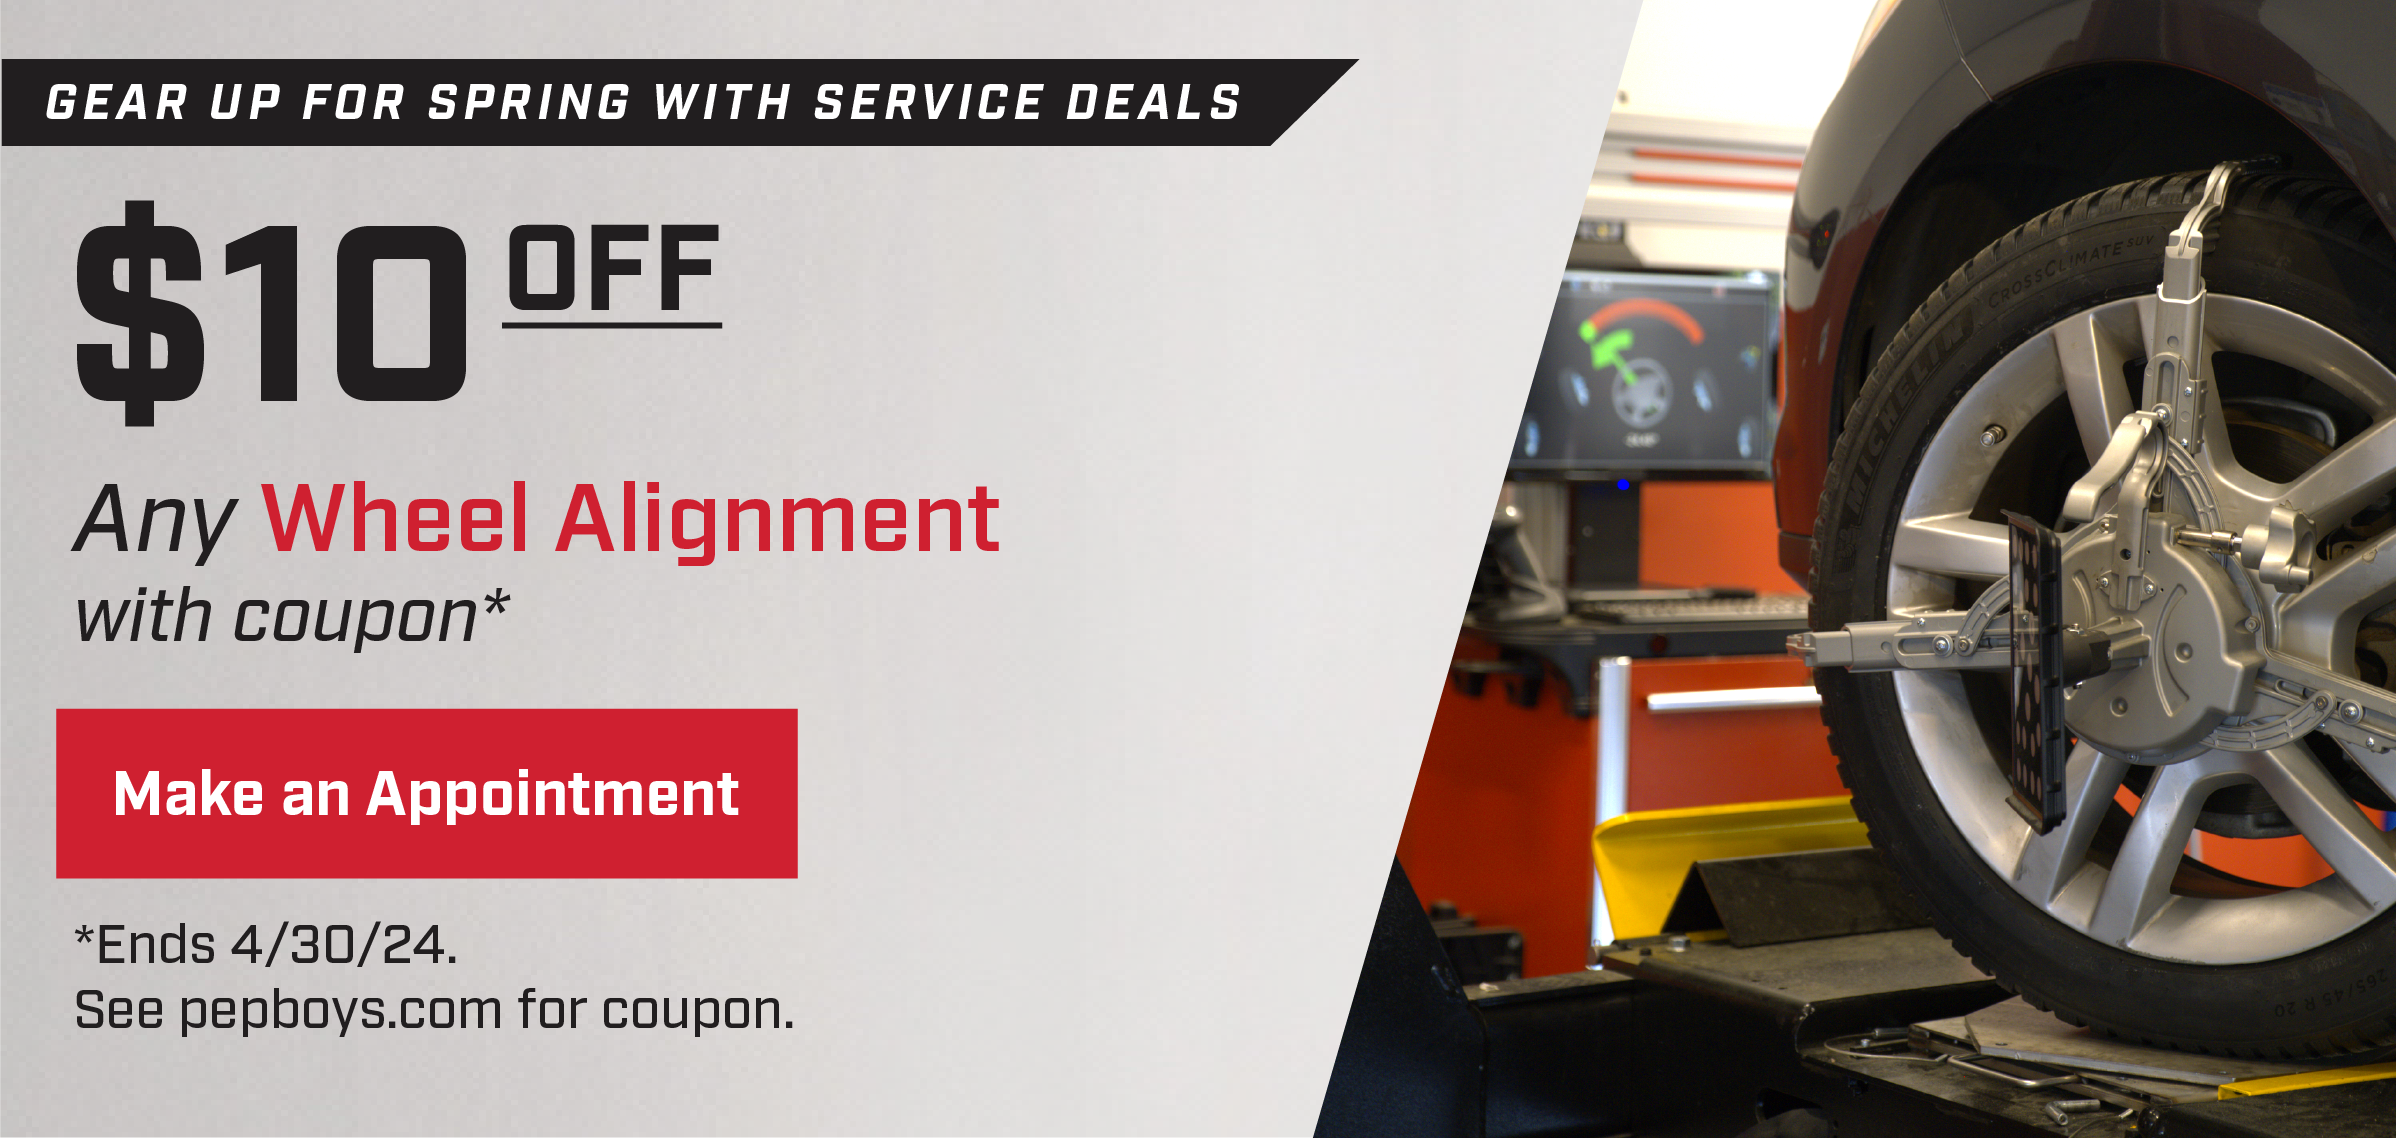 Save on Wheel Alignment Services